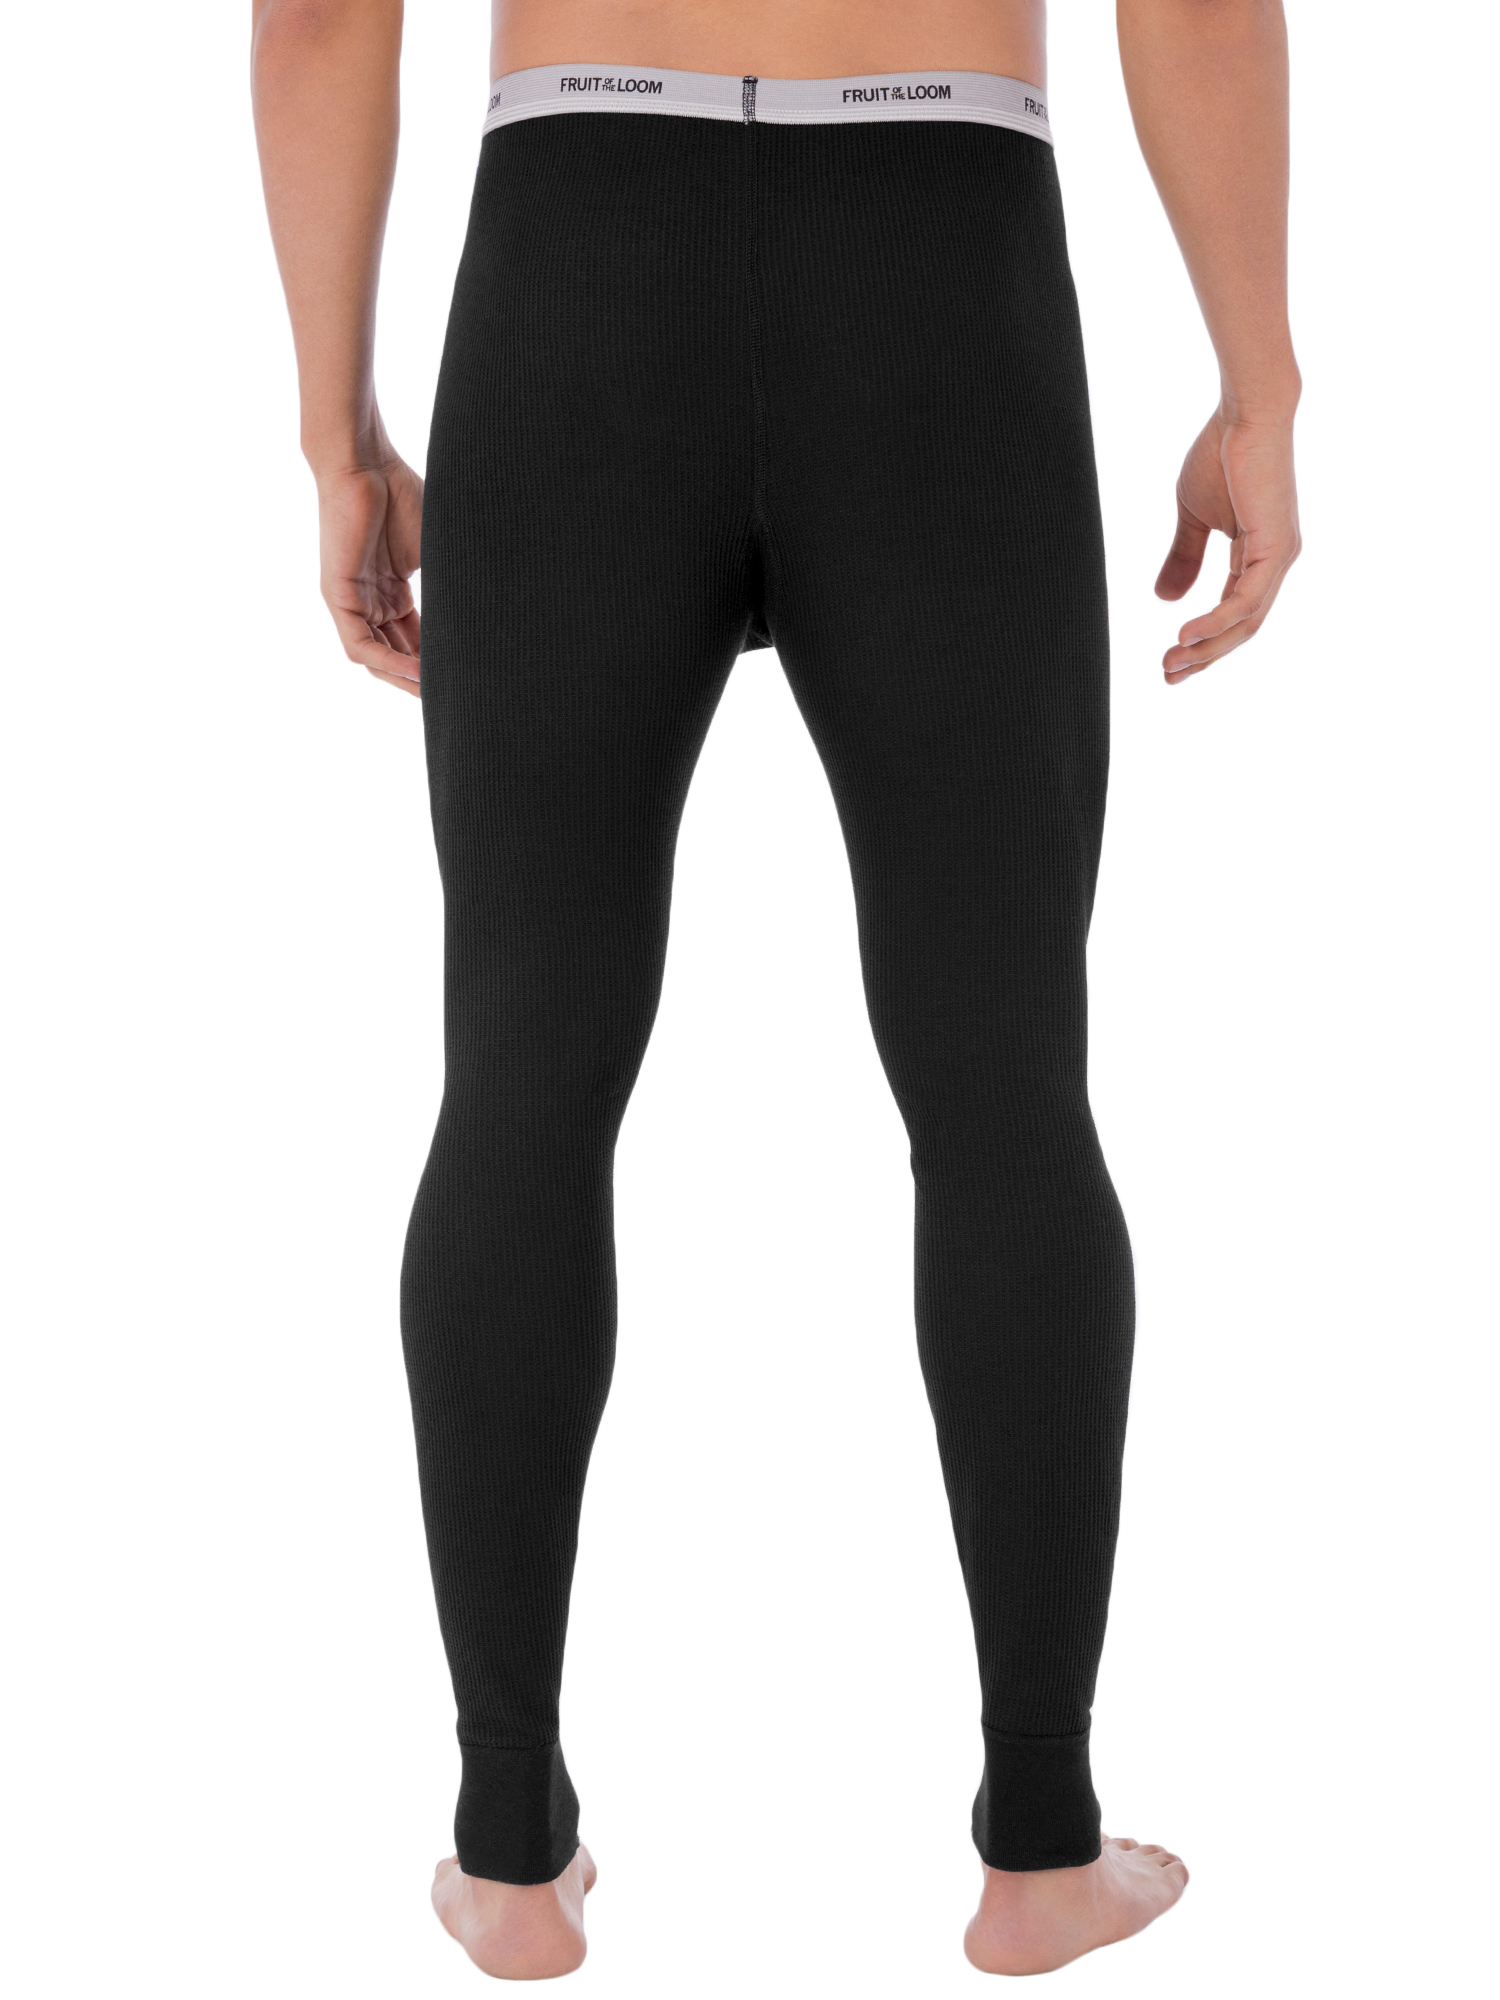 Fruit of the Loom Men's Thermal Waffle Baselayer Underwear Pant - image 3 of 6